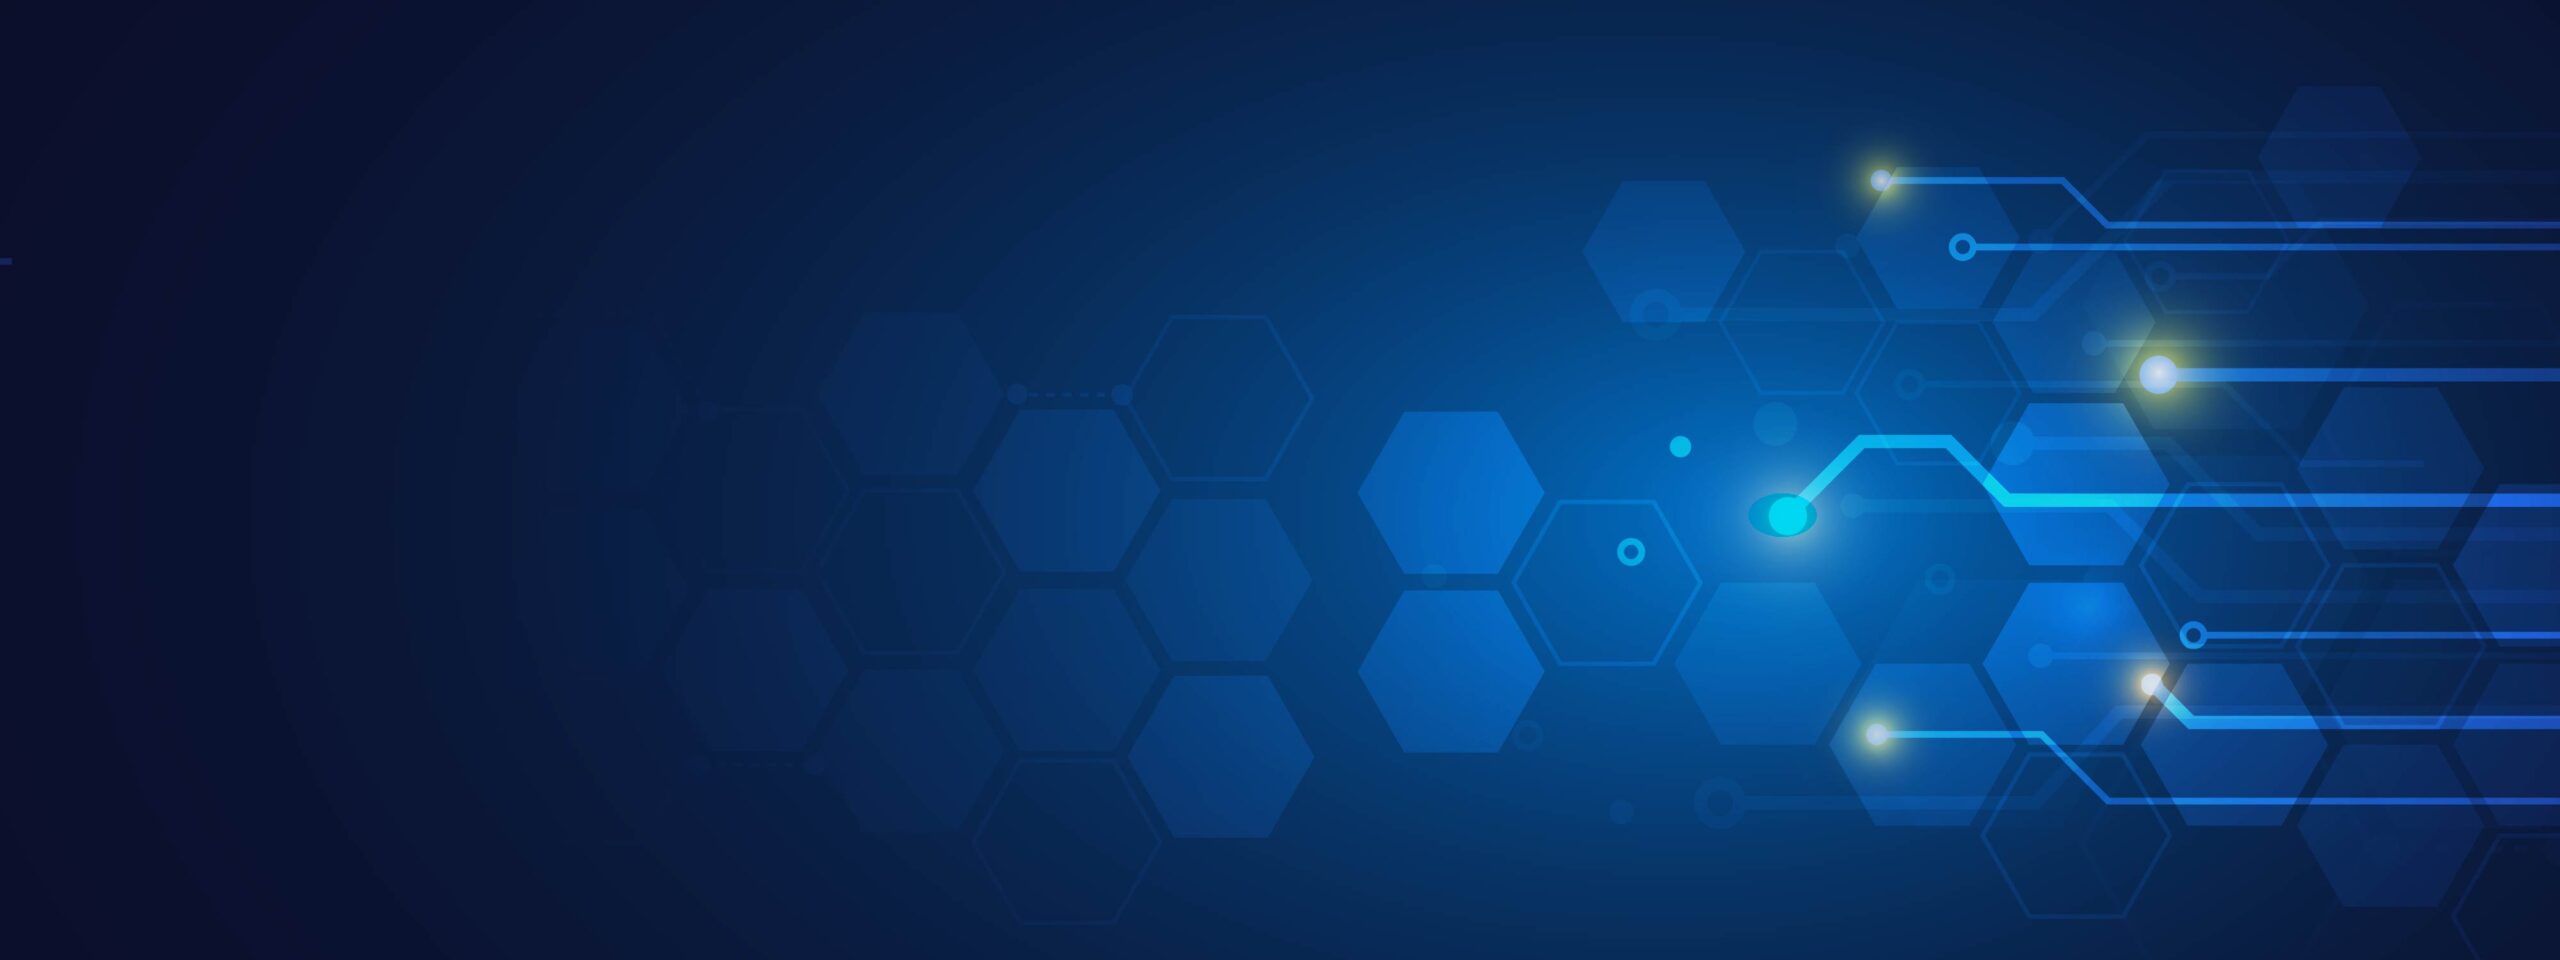 abstract blue hexagon pattern on a dark blue background